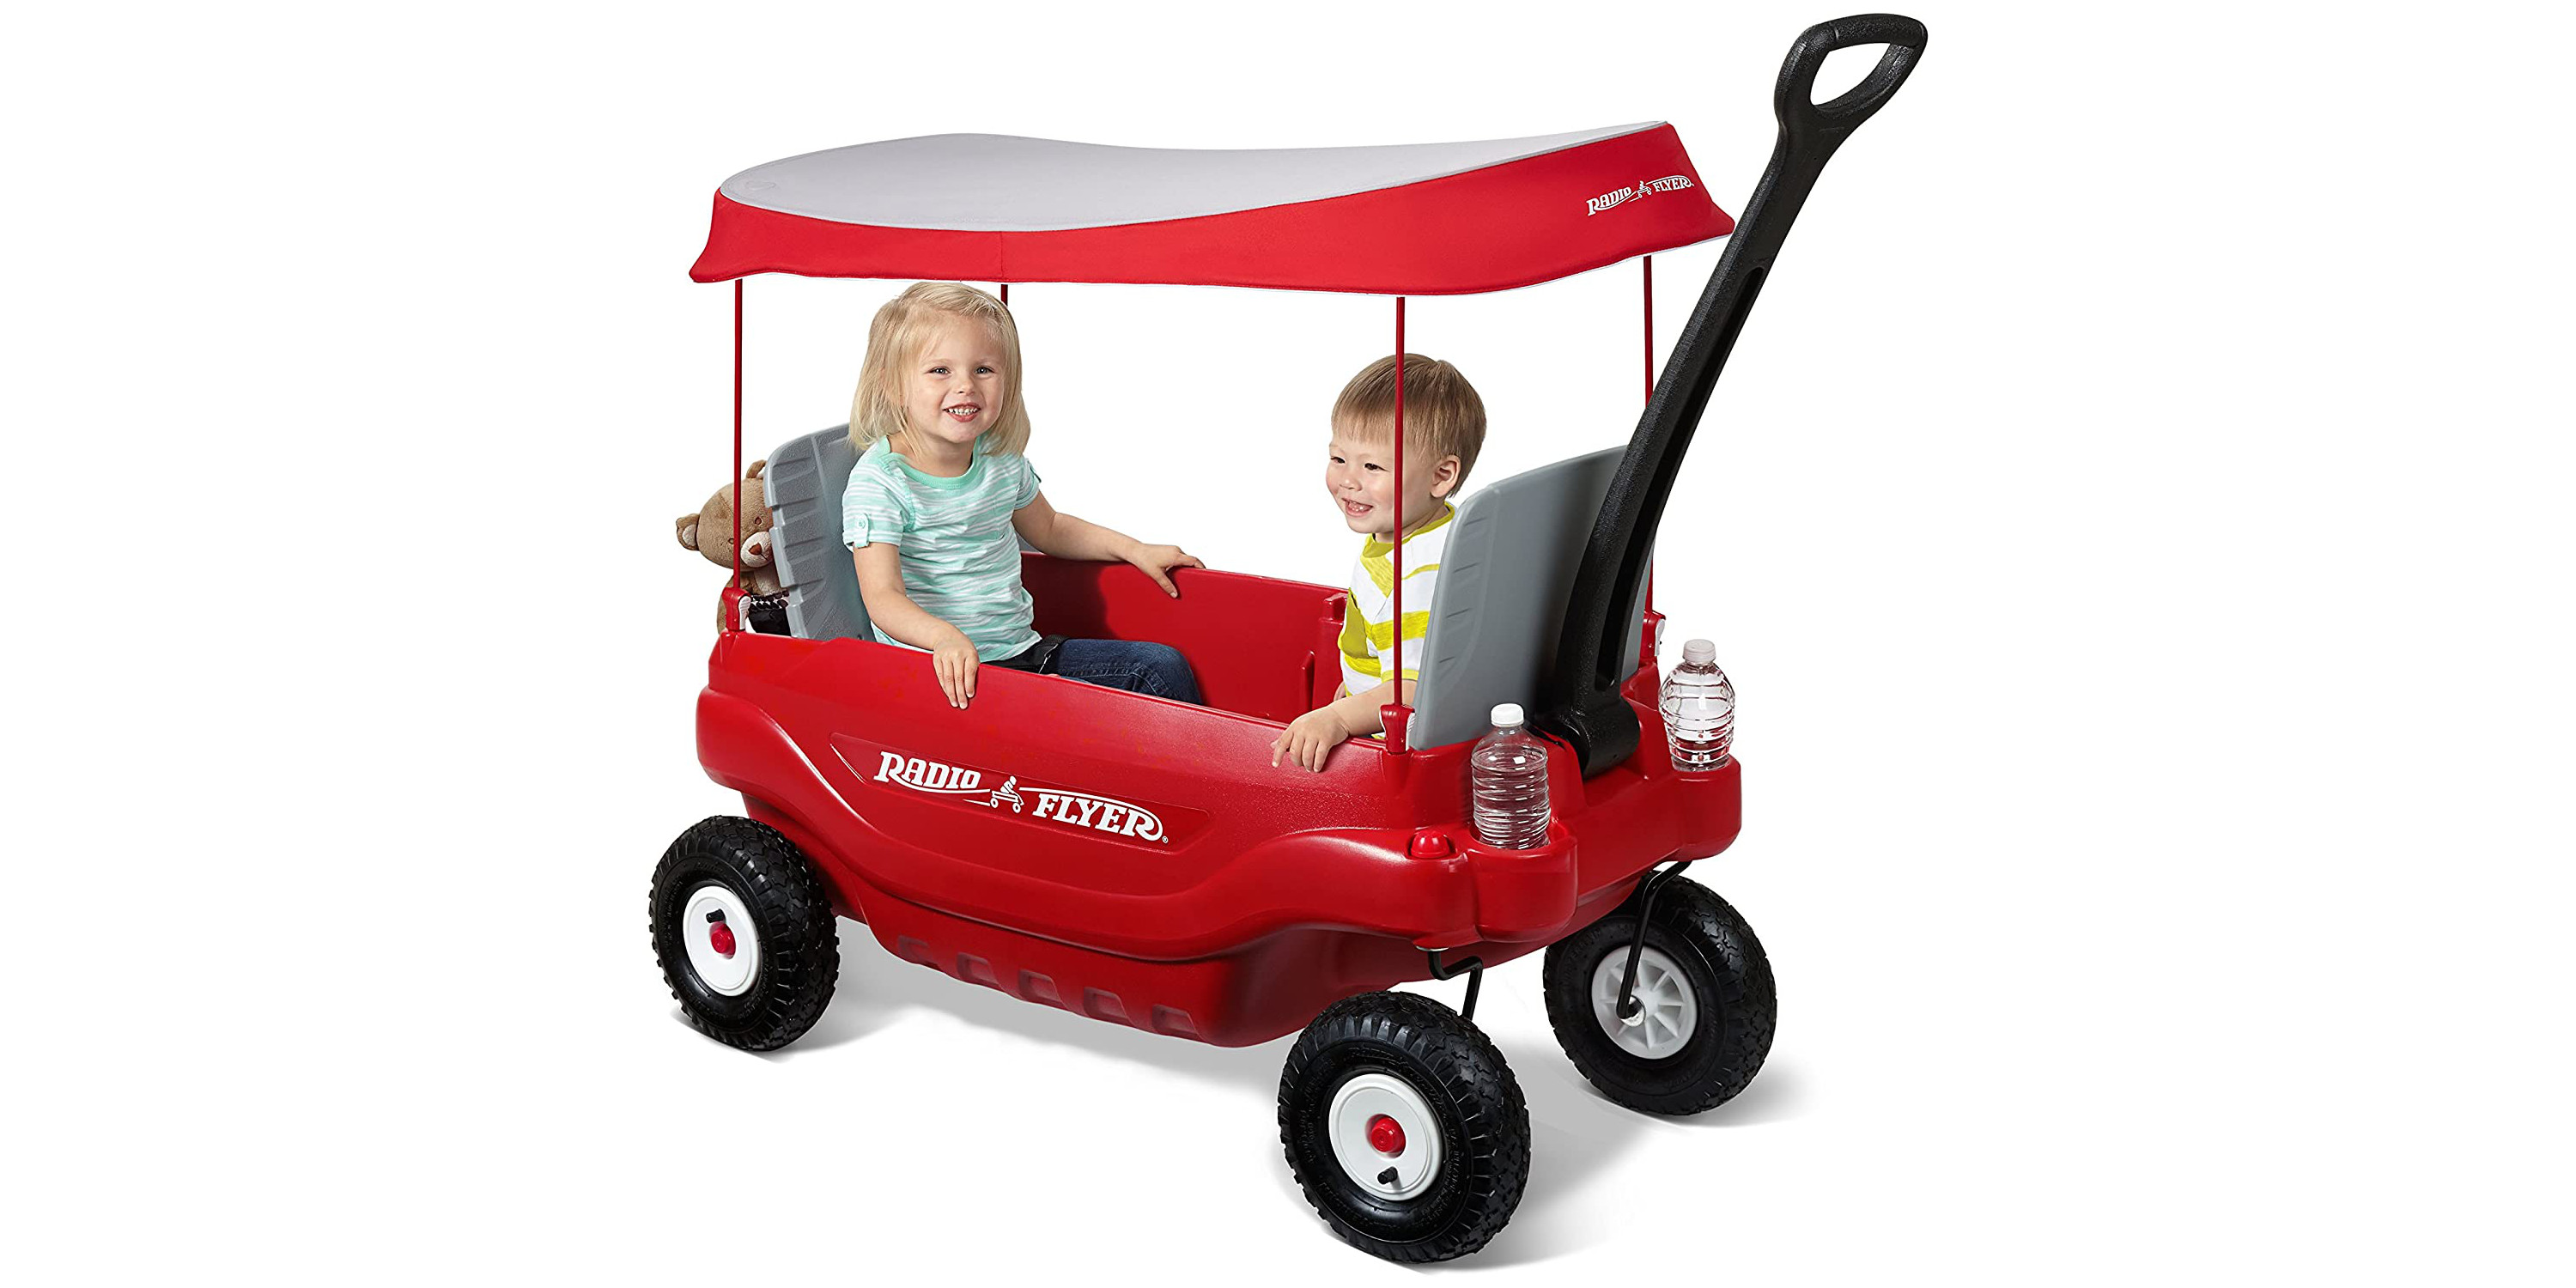 https://9to5toys.com/wp-content/uploads/sites/5/2021/09/Radio-Flyer-Deluxe-All-Terrain-Family-Wagon.jpg